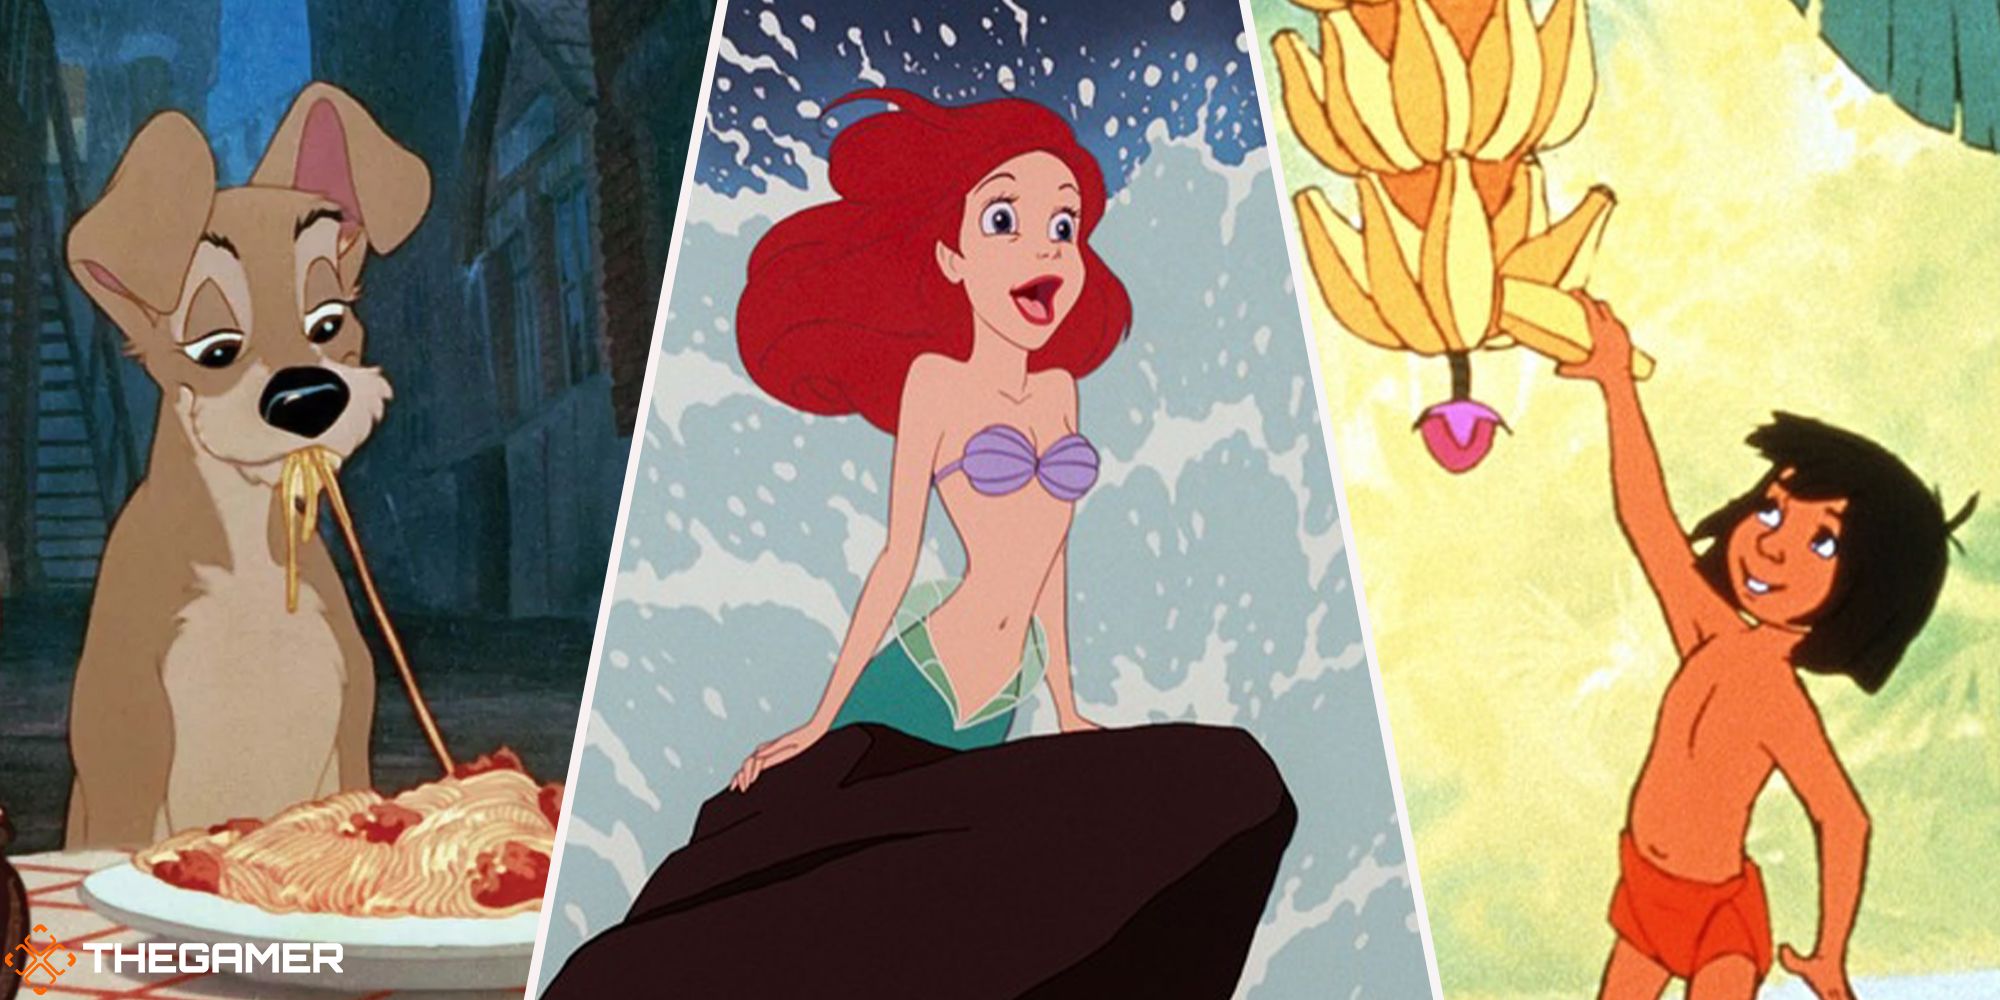 Ariel (little mermaid) in centre, Tramp (lady and the tramp) on left, jungle book on right